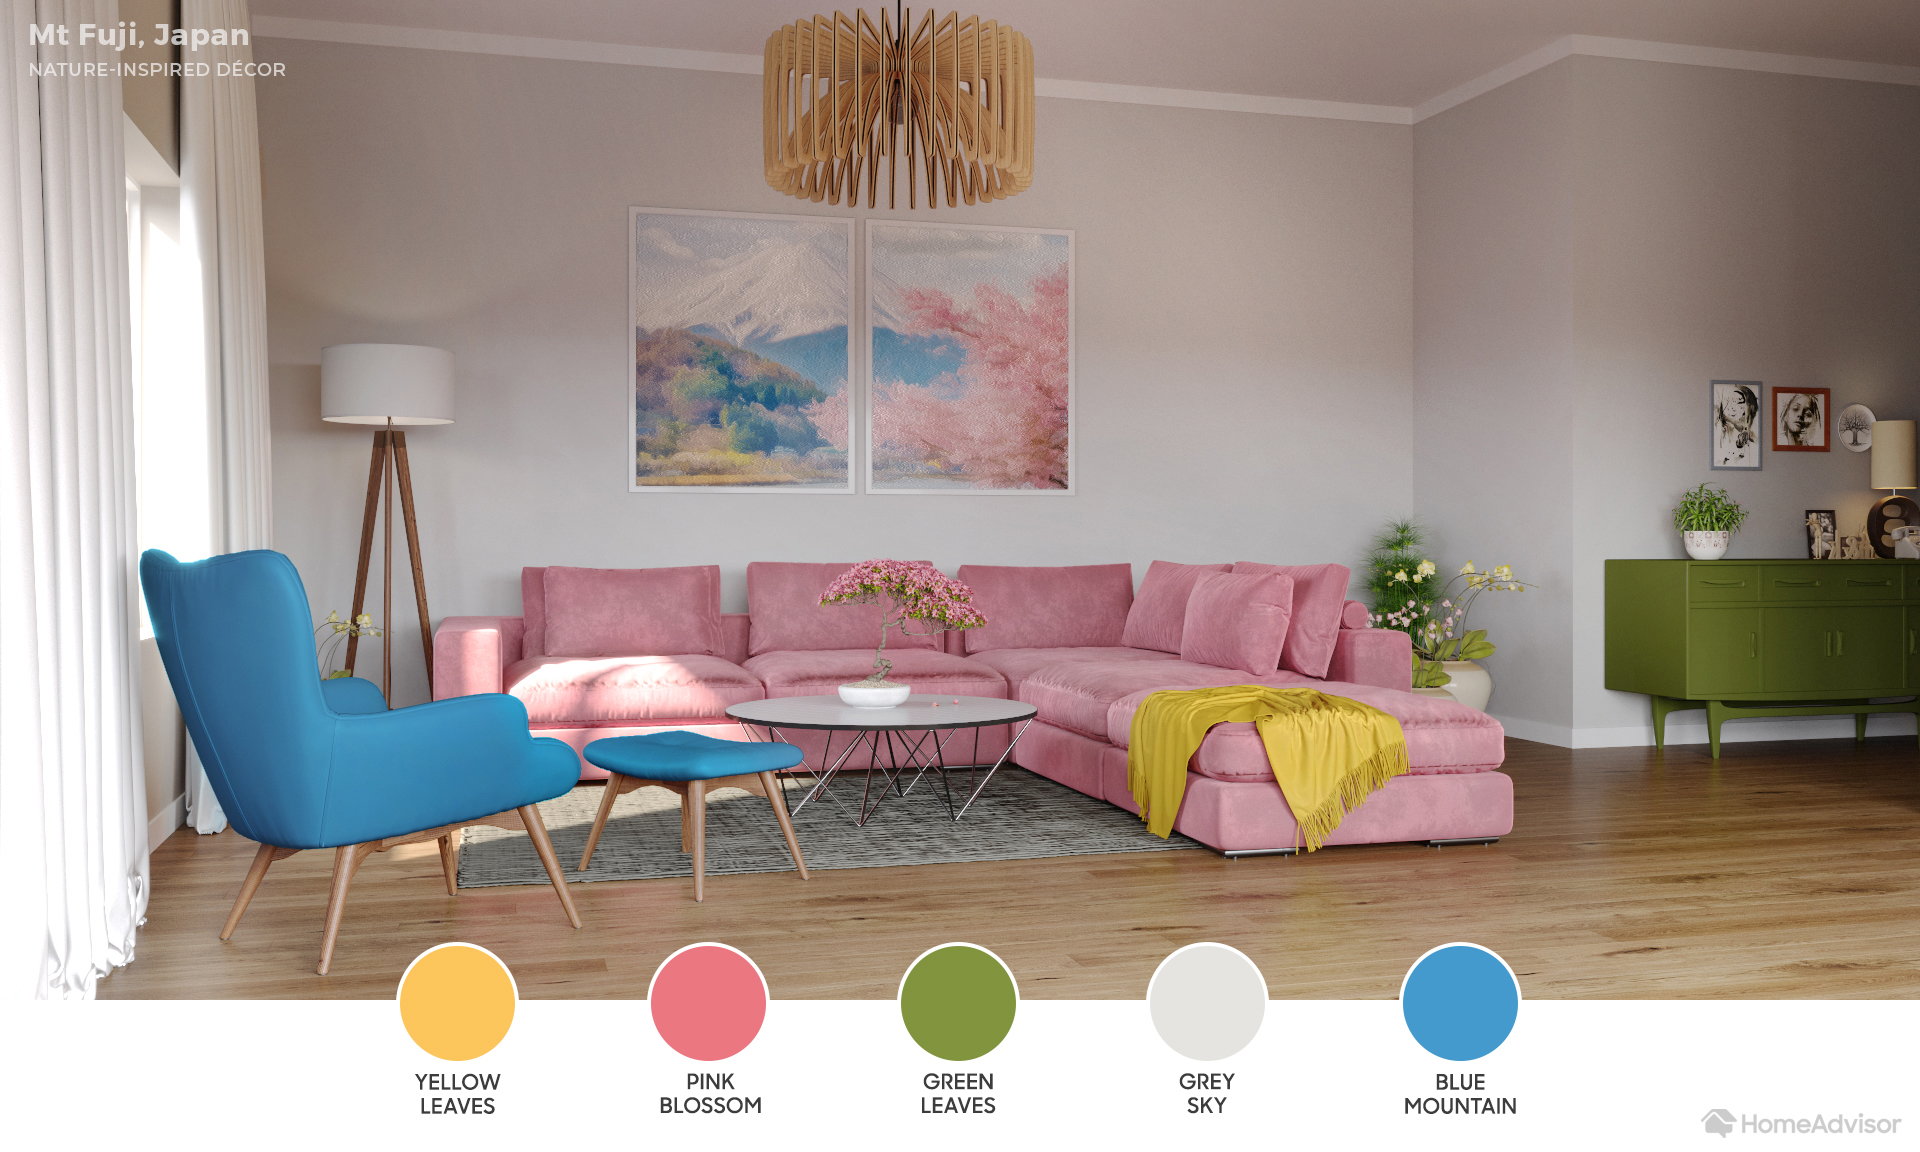 This Mount Fuji-inspired color palette plays on the delicate pinks, blues, and greens of the Japanese countryside.